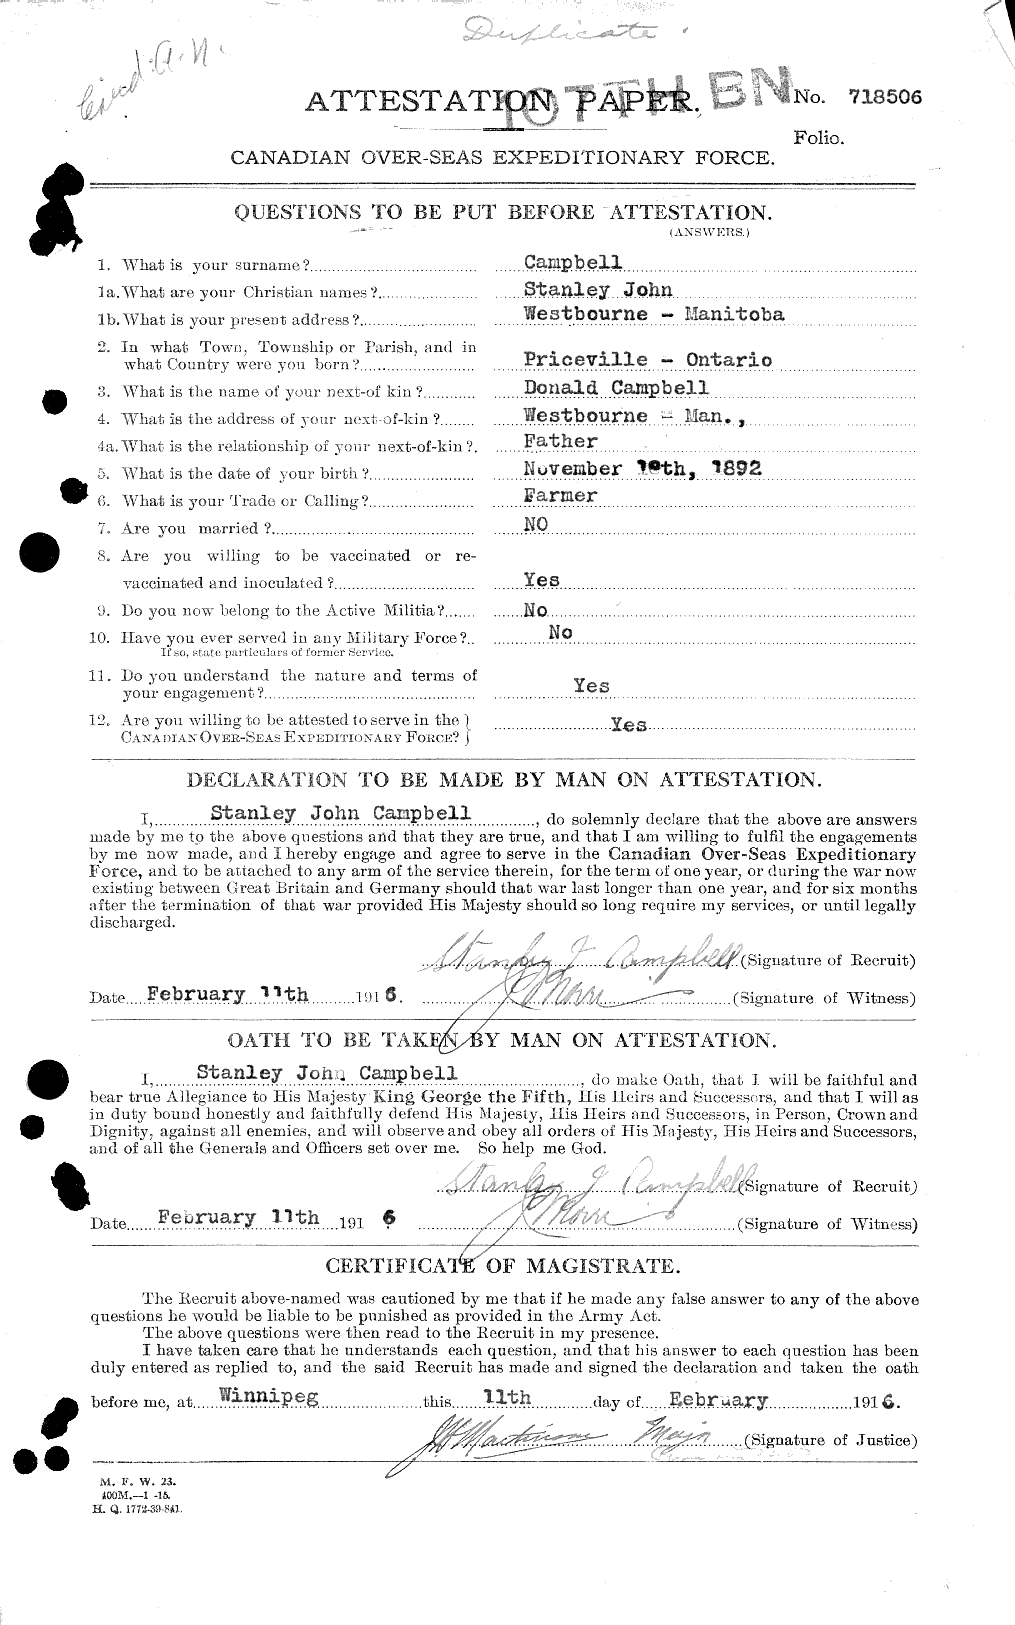 Personnel Records of the First World War - CEF 003982a